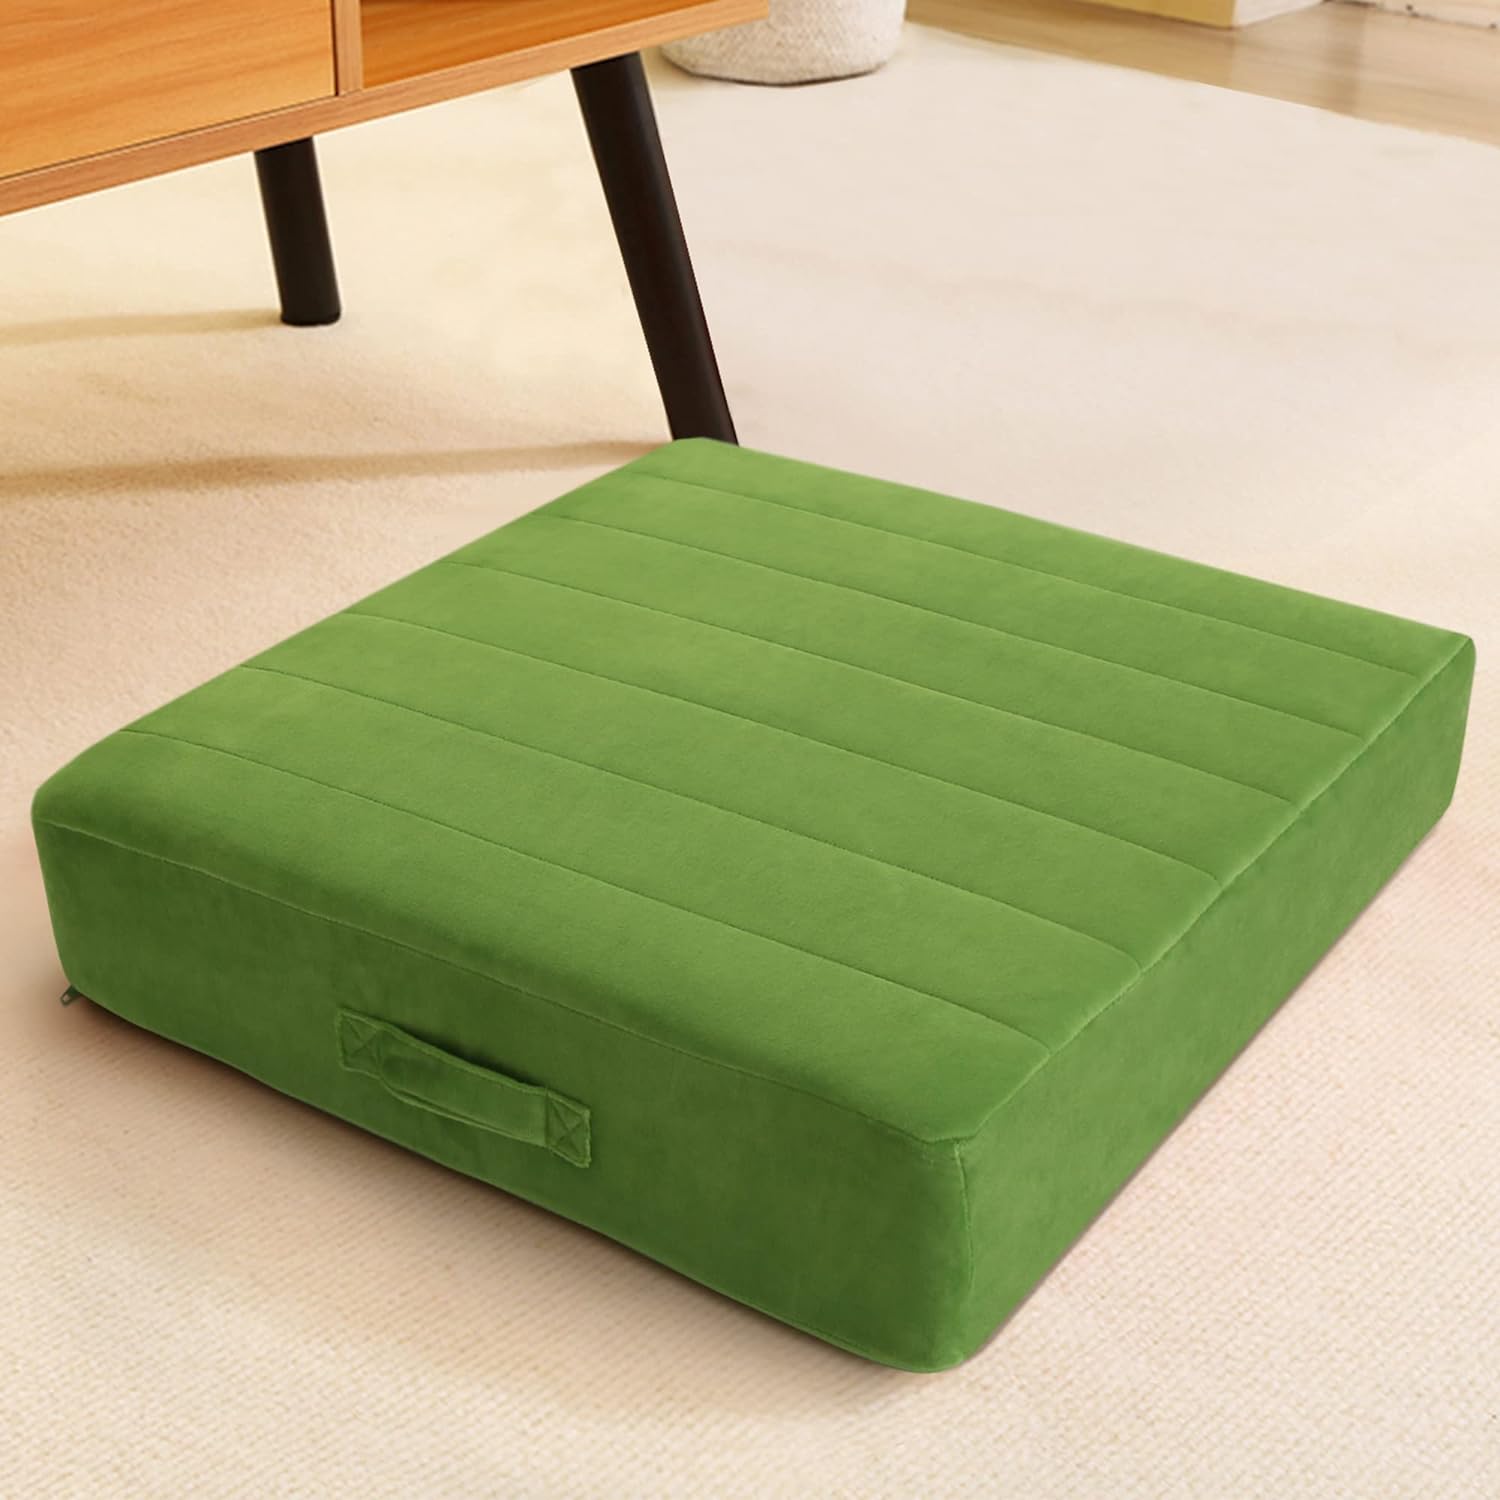 MeMoreCool Square Floor Pillow Seating for Adults Kids, Large Meditation Cushion Floor Pillow with Thick Foam & Soft Tufted Cover, Washable Big Pillow Seat Floor Cushion for Sitting Yoga 22" Green